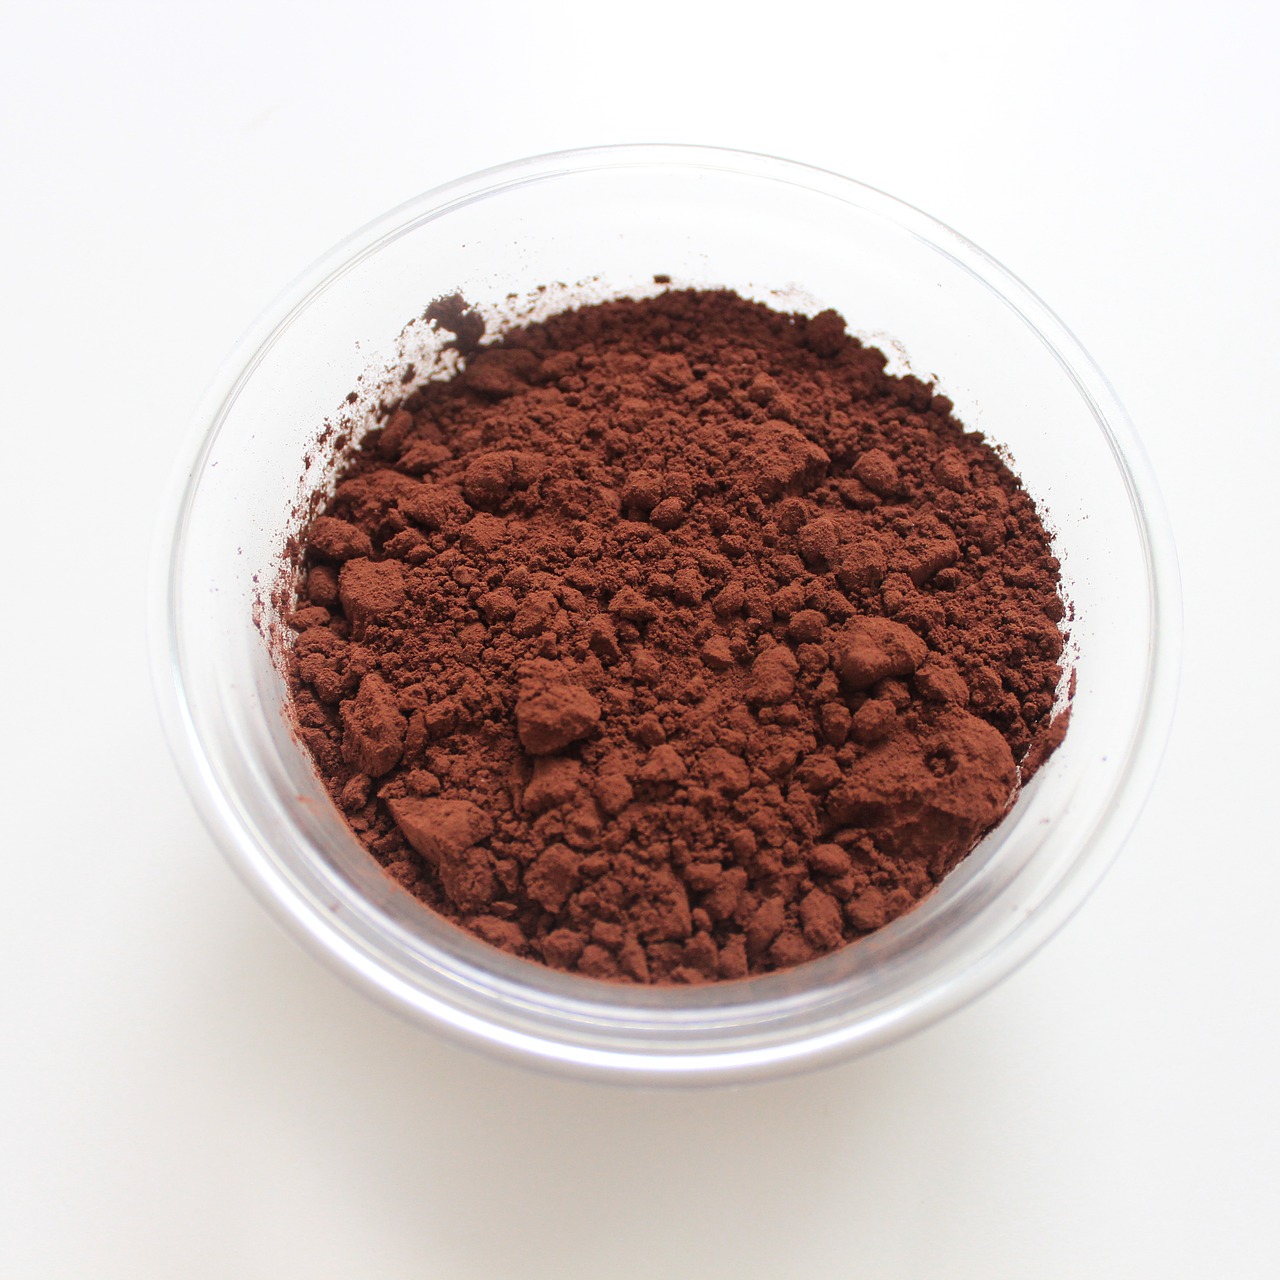 raw cocoa powder, cacao, cosmetics, superfoods, anti-aging foods, am coffee, amcoffee, natural beauty